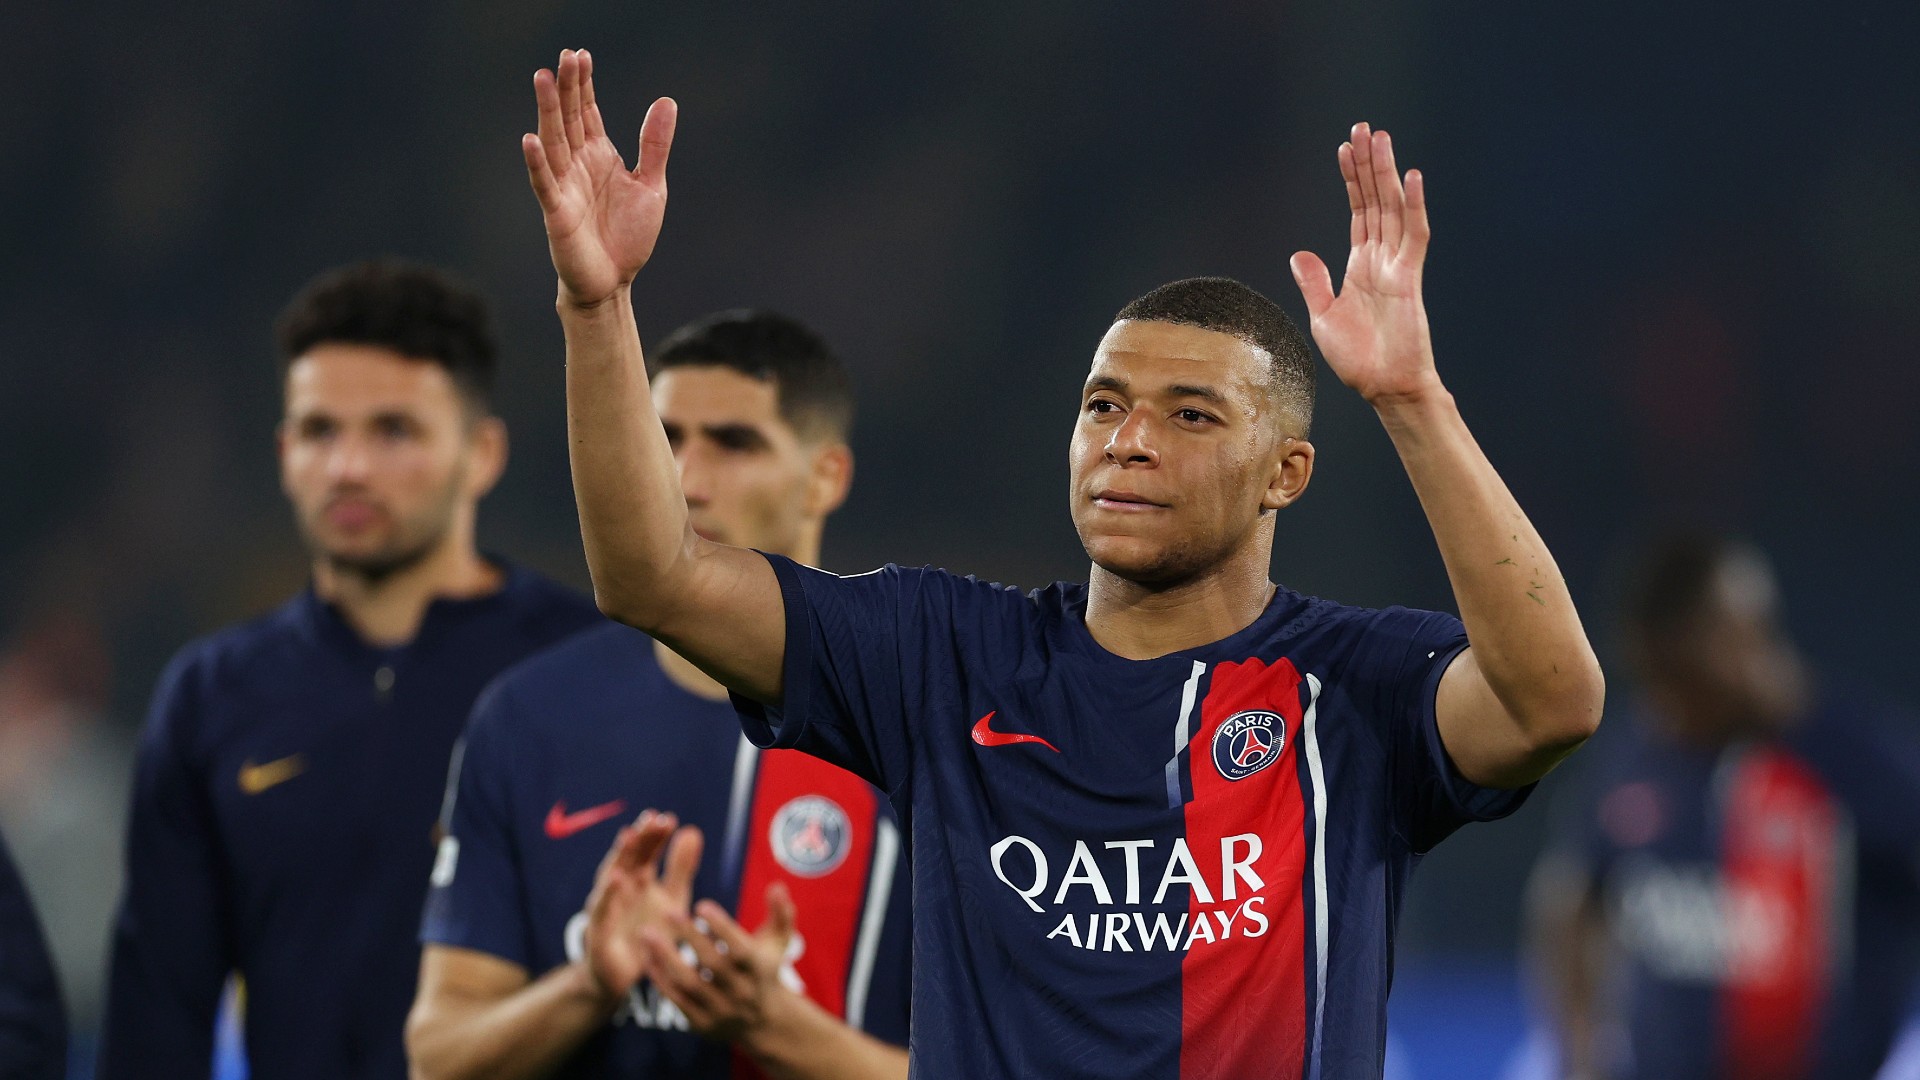 Mbappe to leave PSG